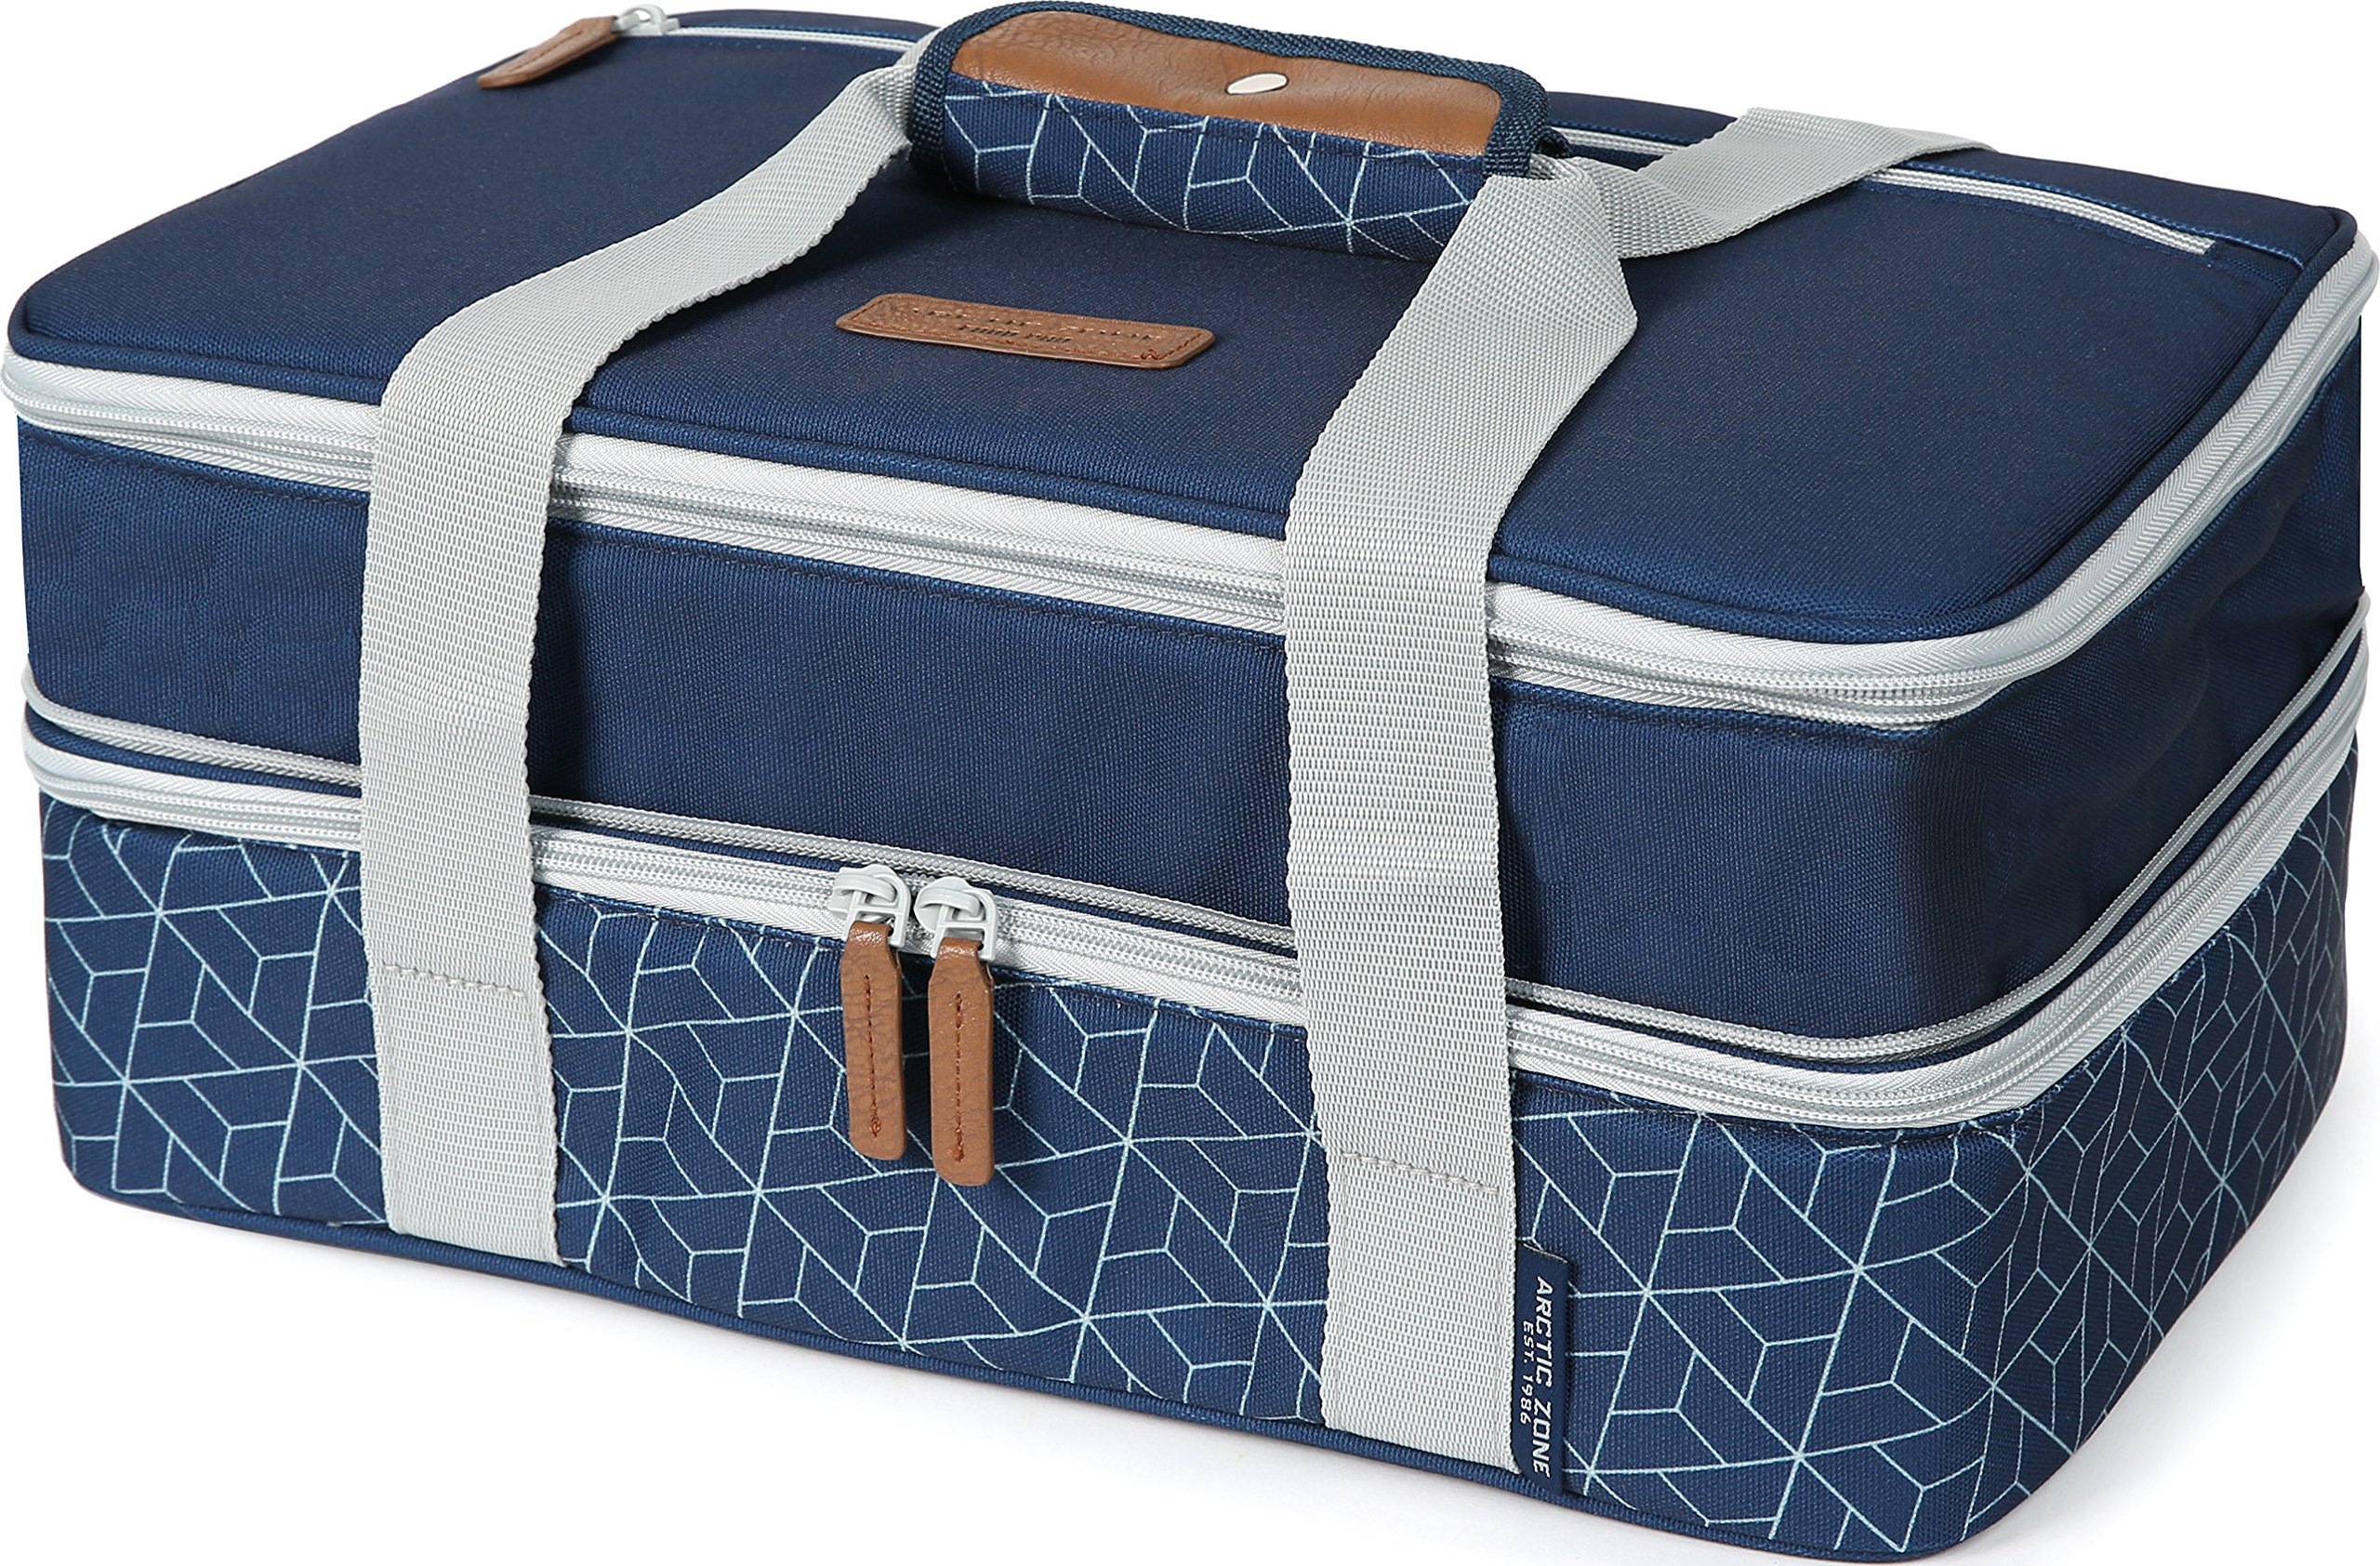 Arctic Zone Hot/Cold Insulated Food and Casserole Carrier, Large, Navy